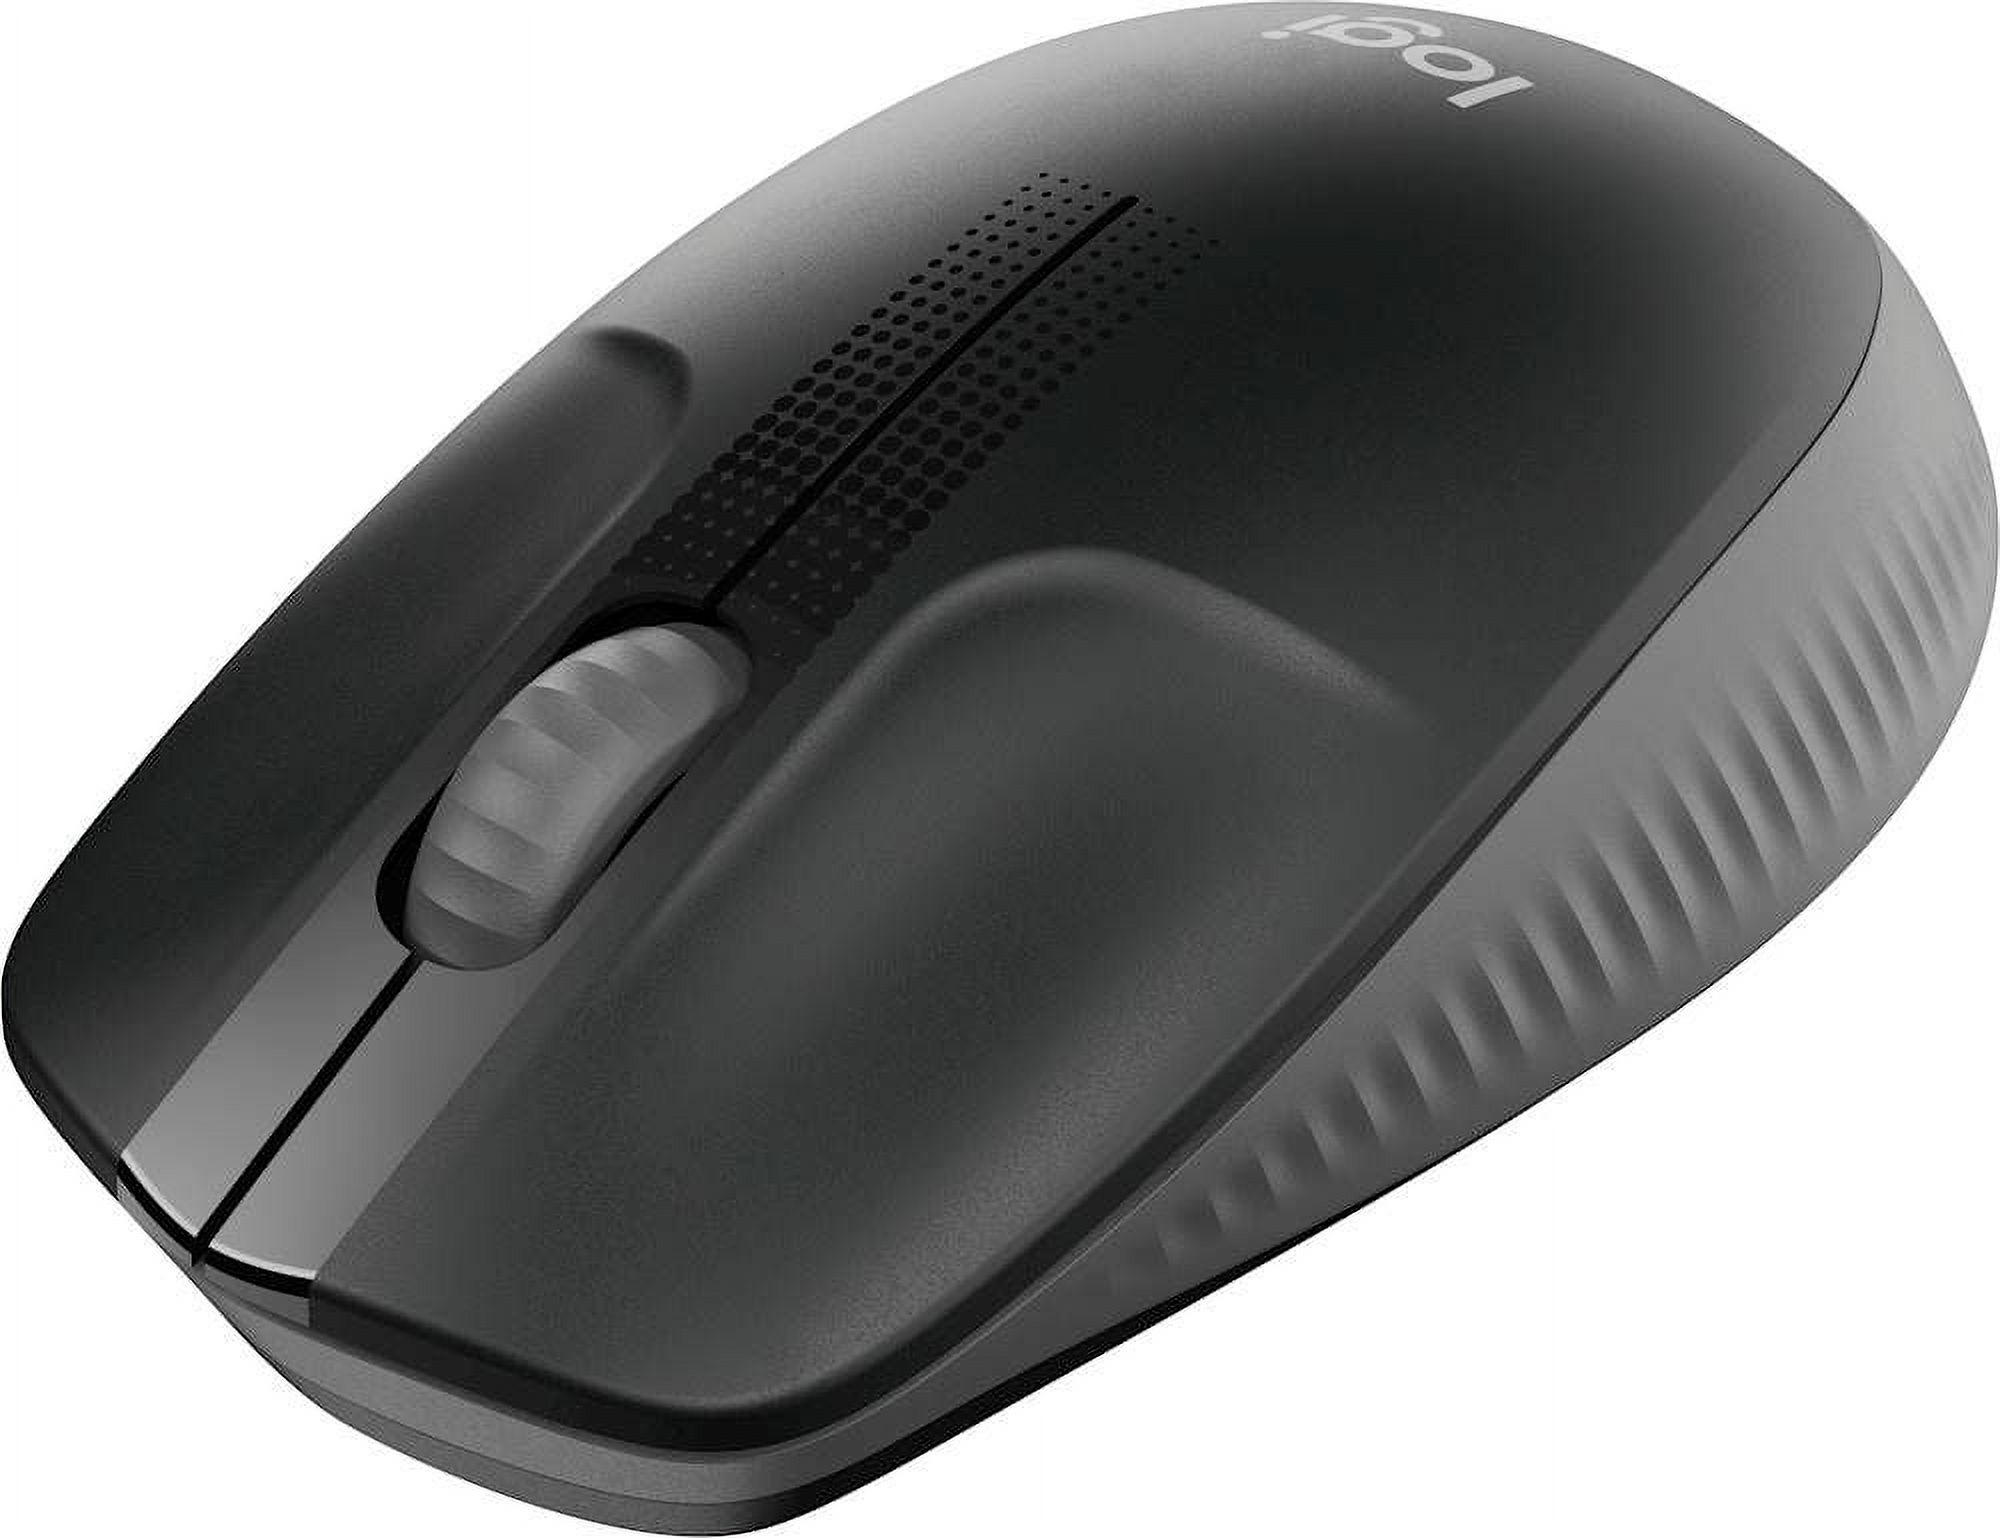 Logitech M190 Full-Sized Wireless Mouse, Charcoal - image 3 of 4